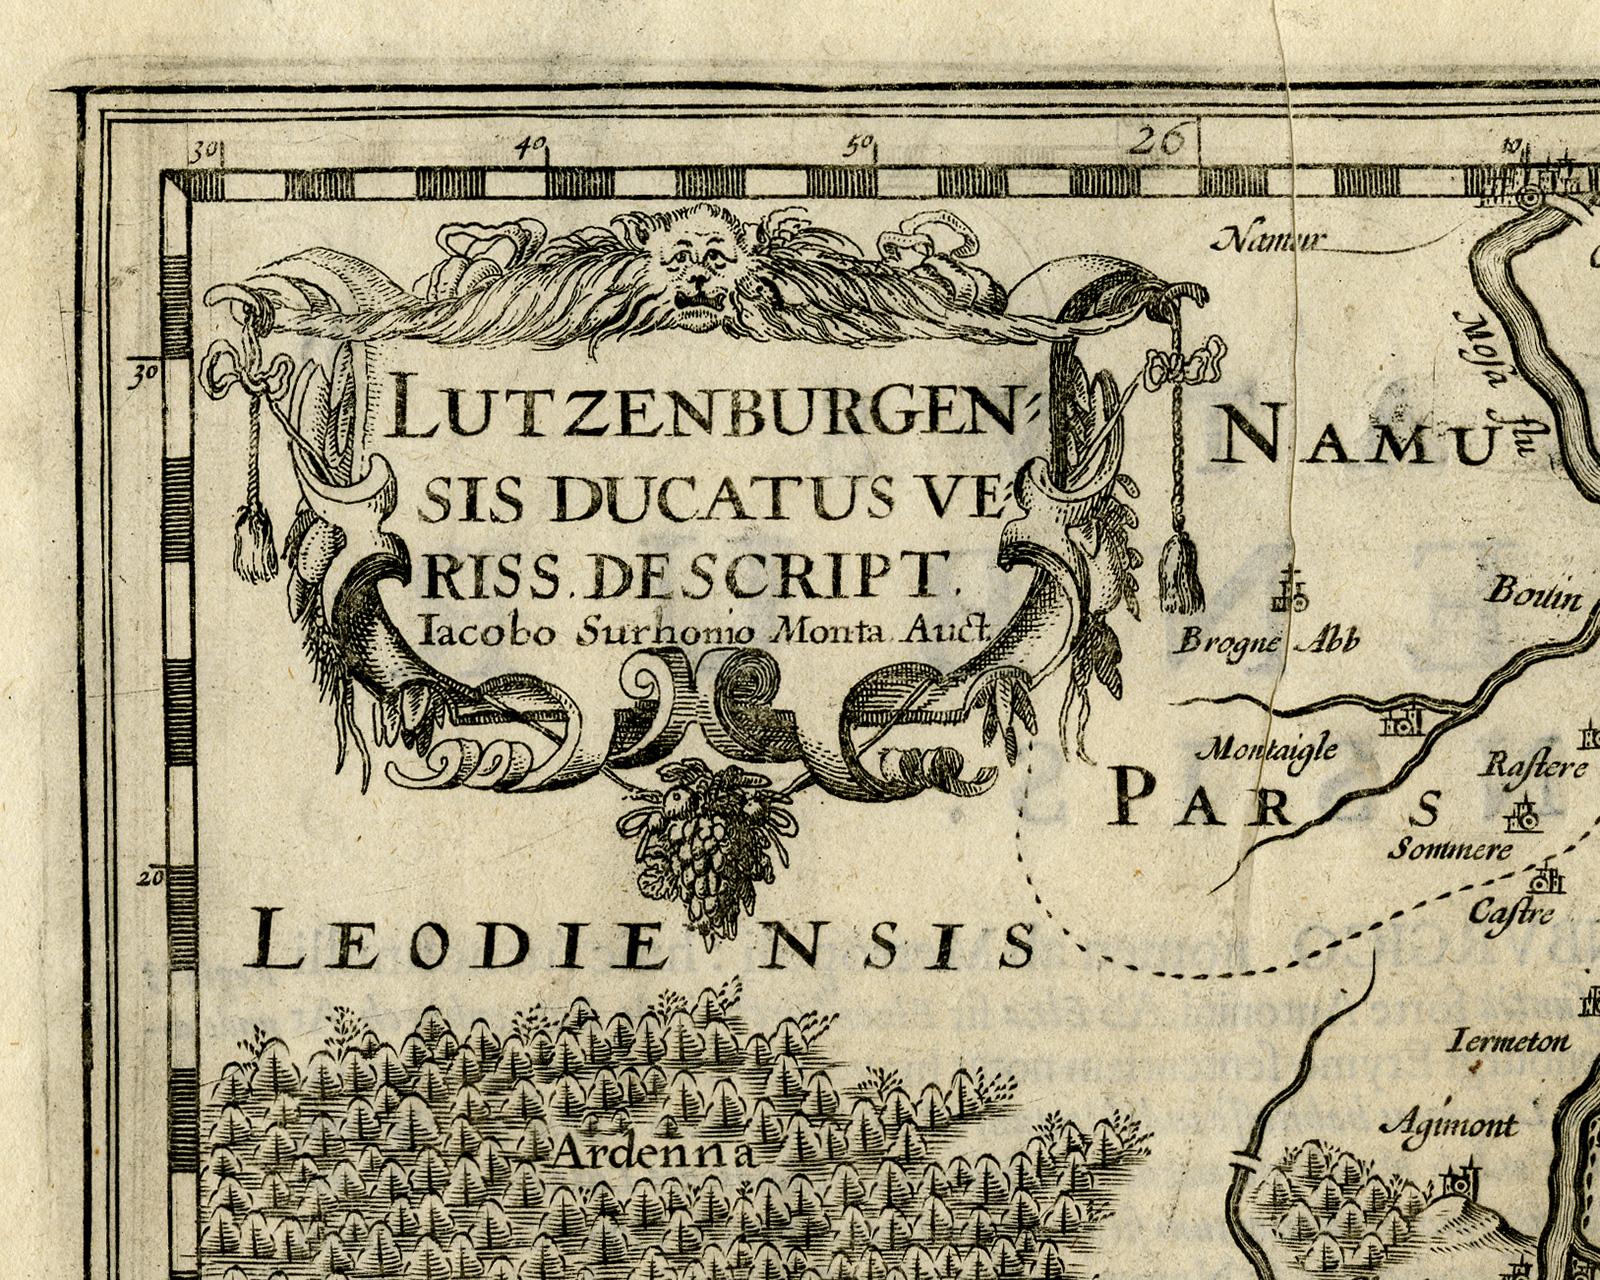 Antique map of Luxembourg and its region by Kaerius - Engraving - 17th c. - Old Masters Print by Pieter van den Keere